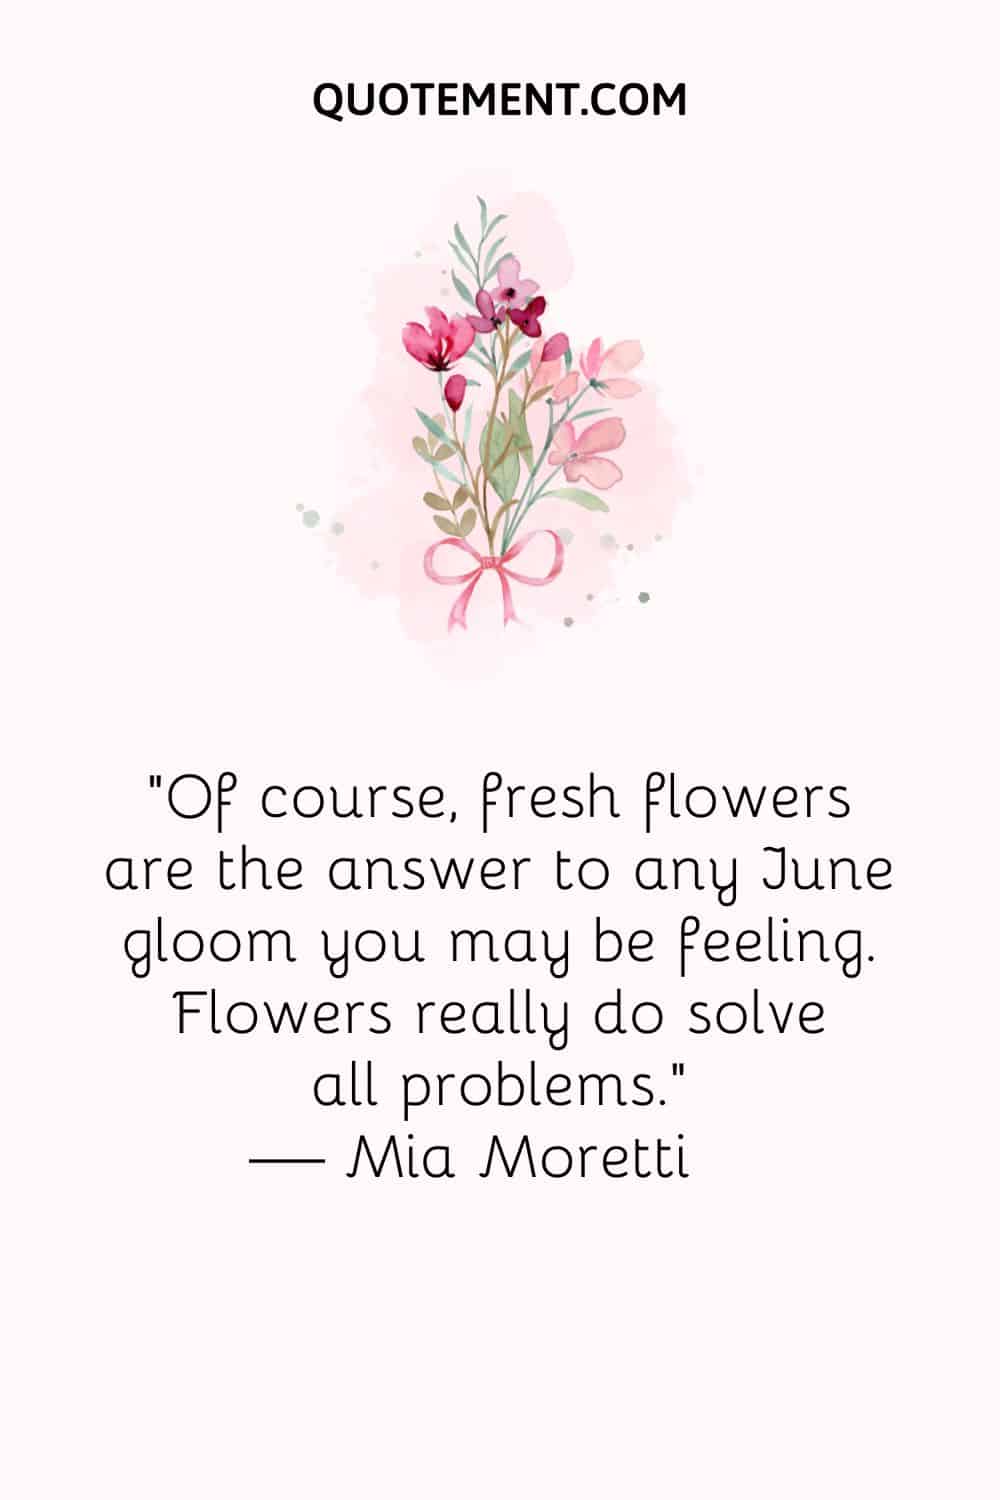 “Of course, fresh flowers are the answer to any June gloom you may be feeling. Flowers really do solve all problems.” — Mia Moretti